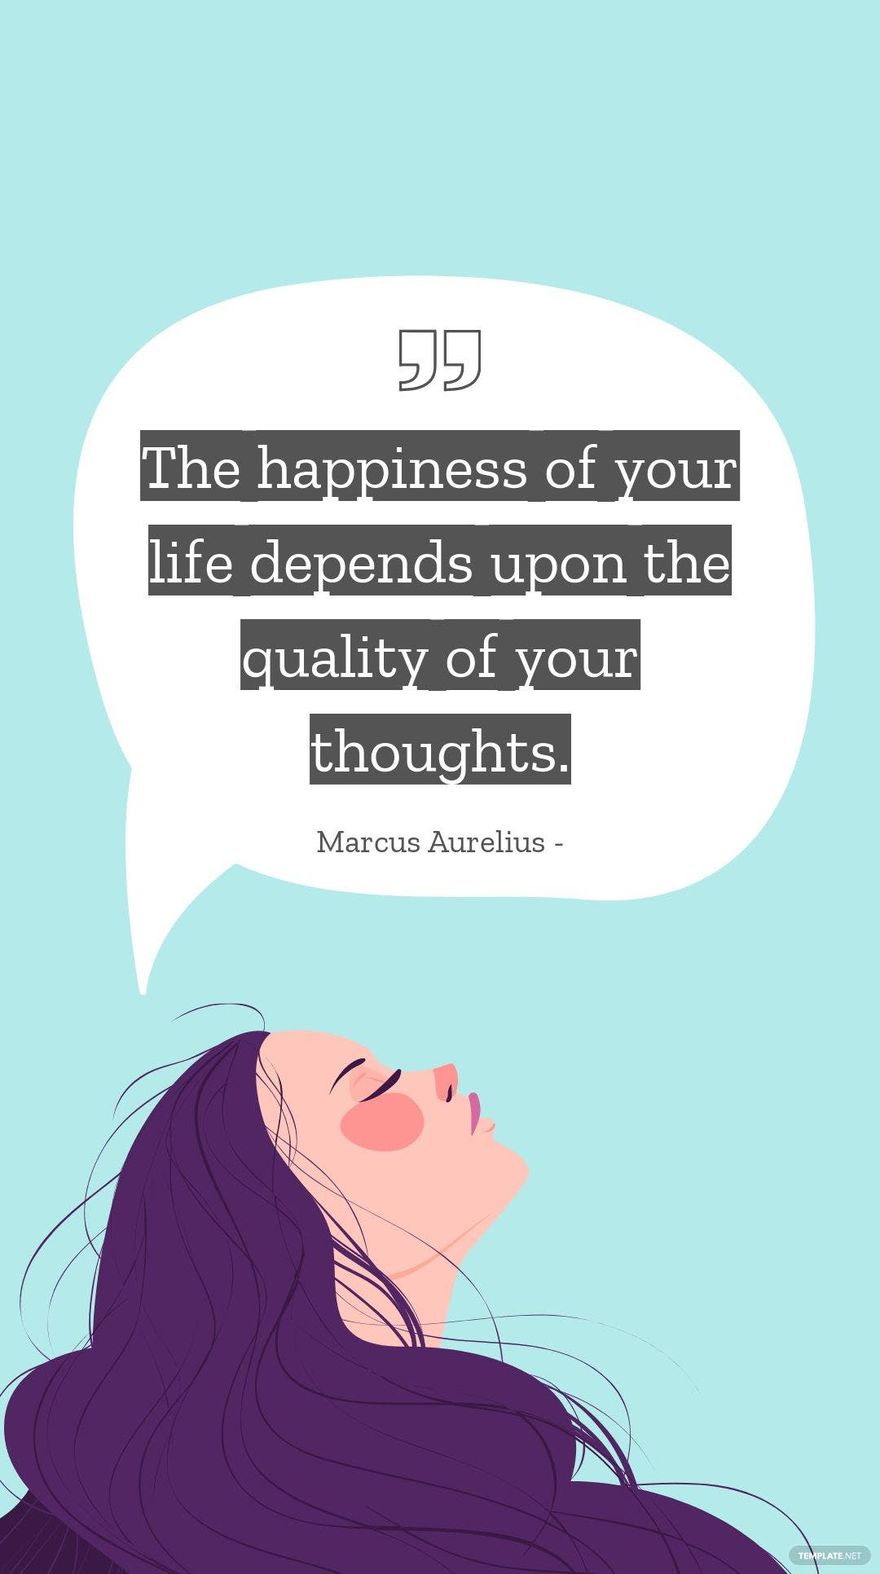 Marcus Aurelius - The happiness of your life depends upon the quality of your thoughts.